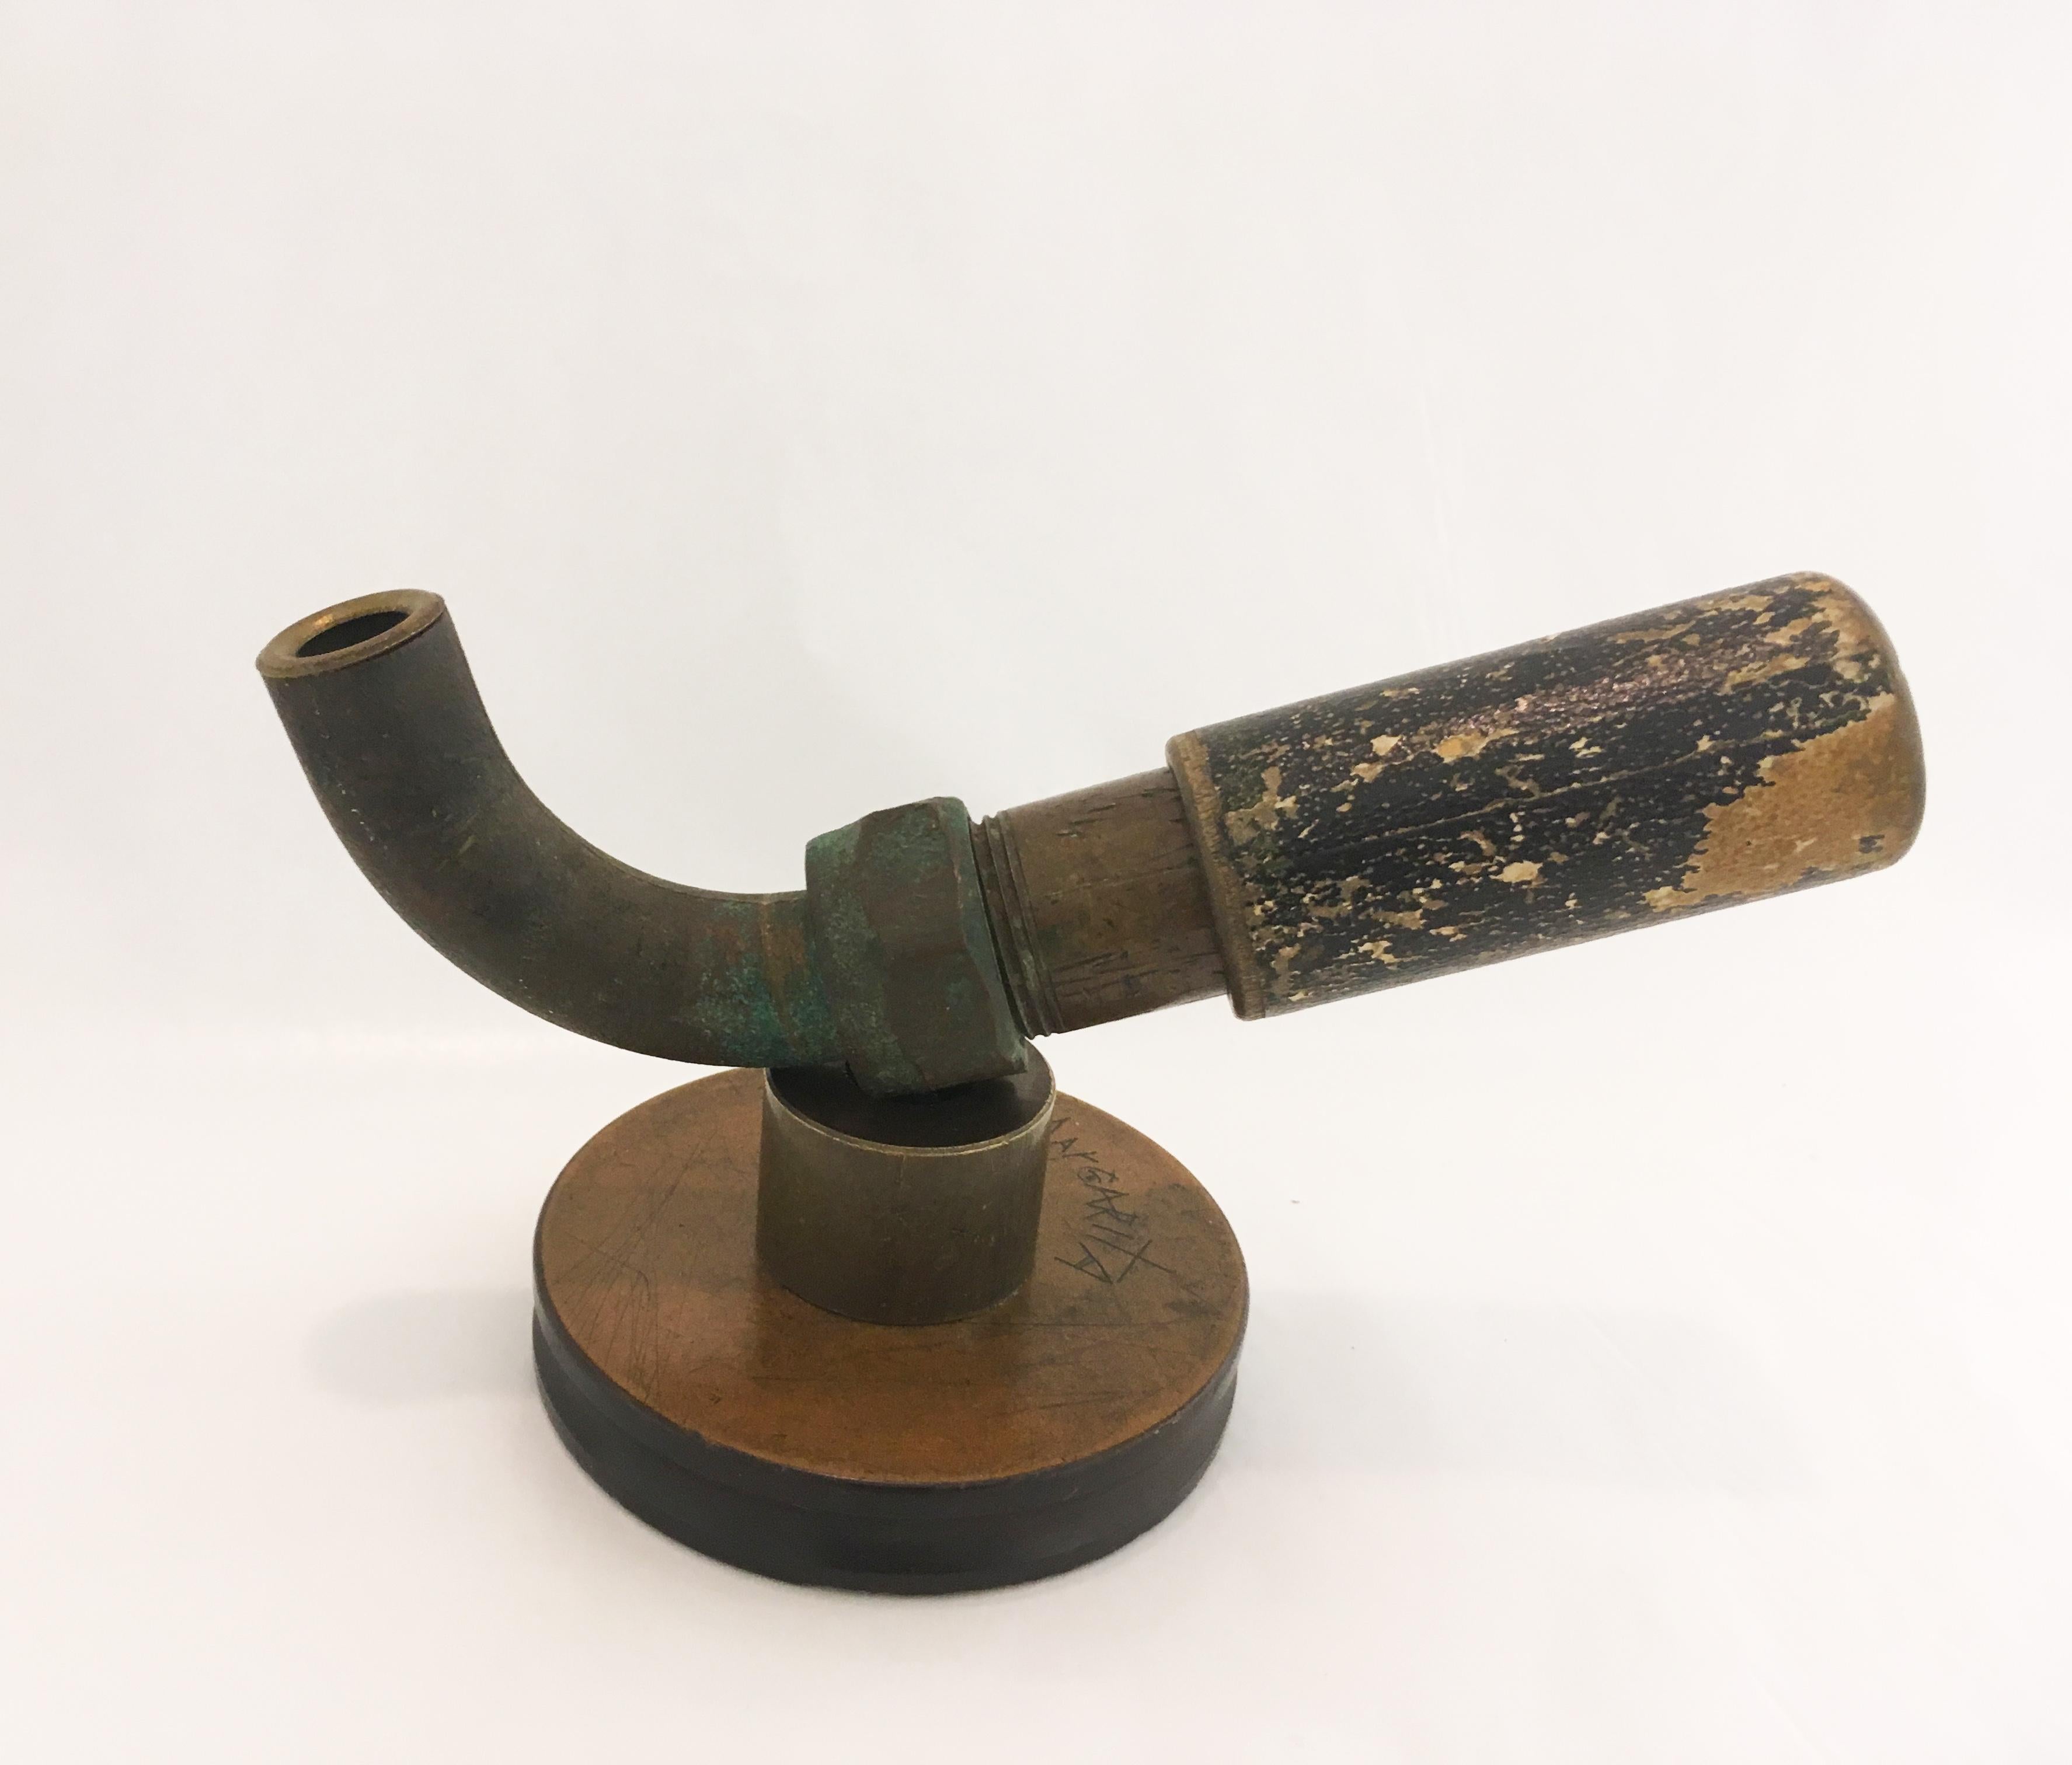 Pas Une Pipe, brass, resin, wood, found object, sculpture, abstract - Mixed Media Art by C. T. Bray